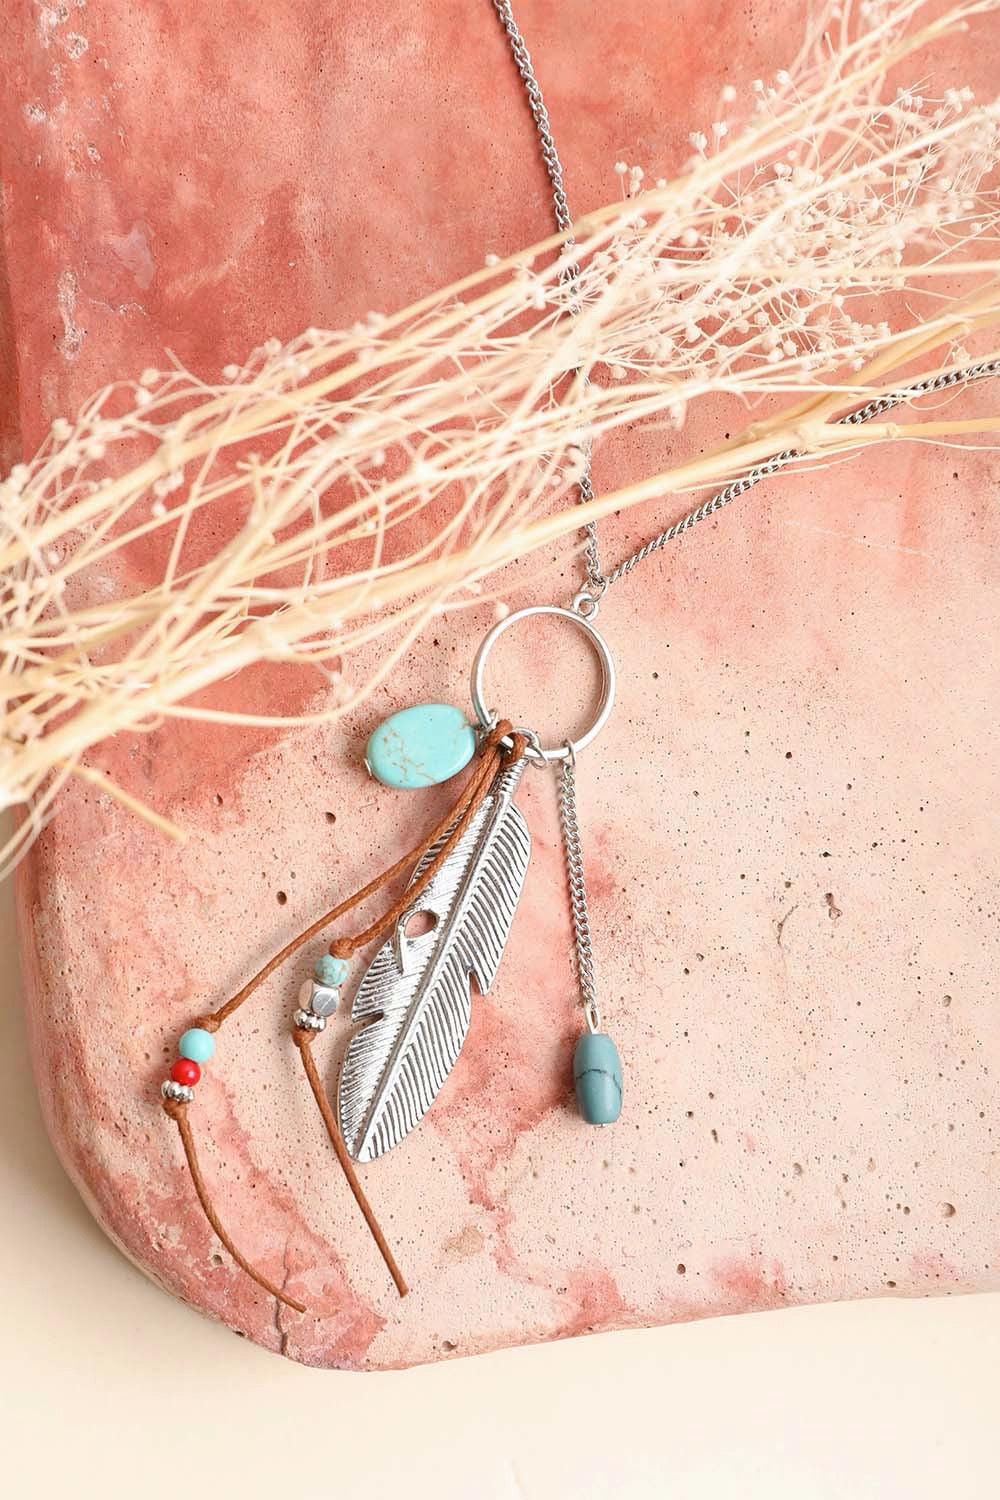 Turquoise Charm Necklace - Brand My Case